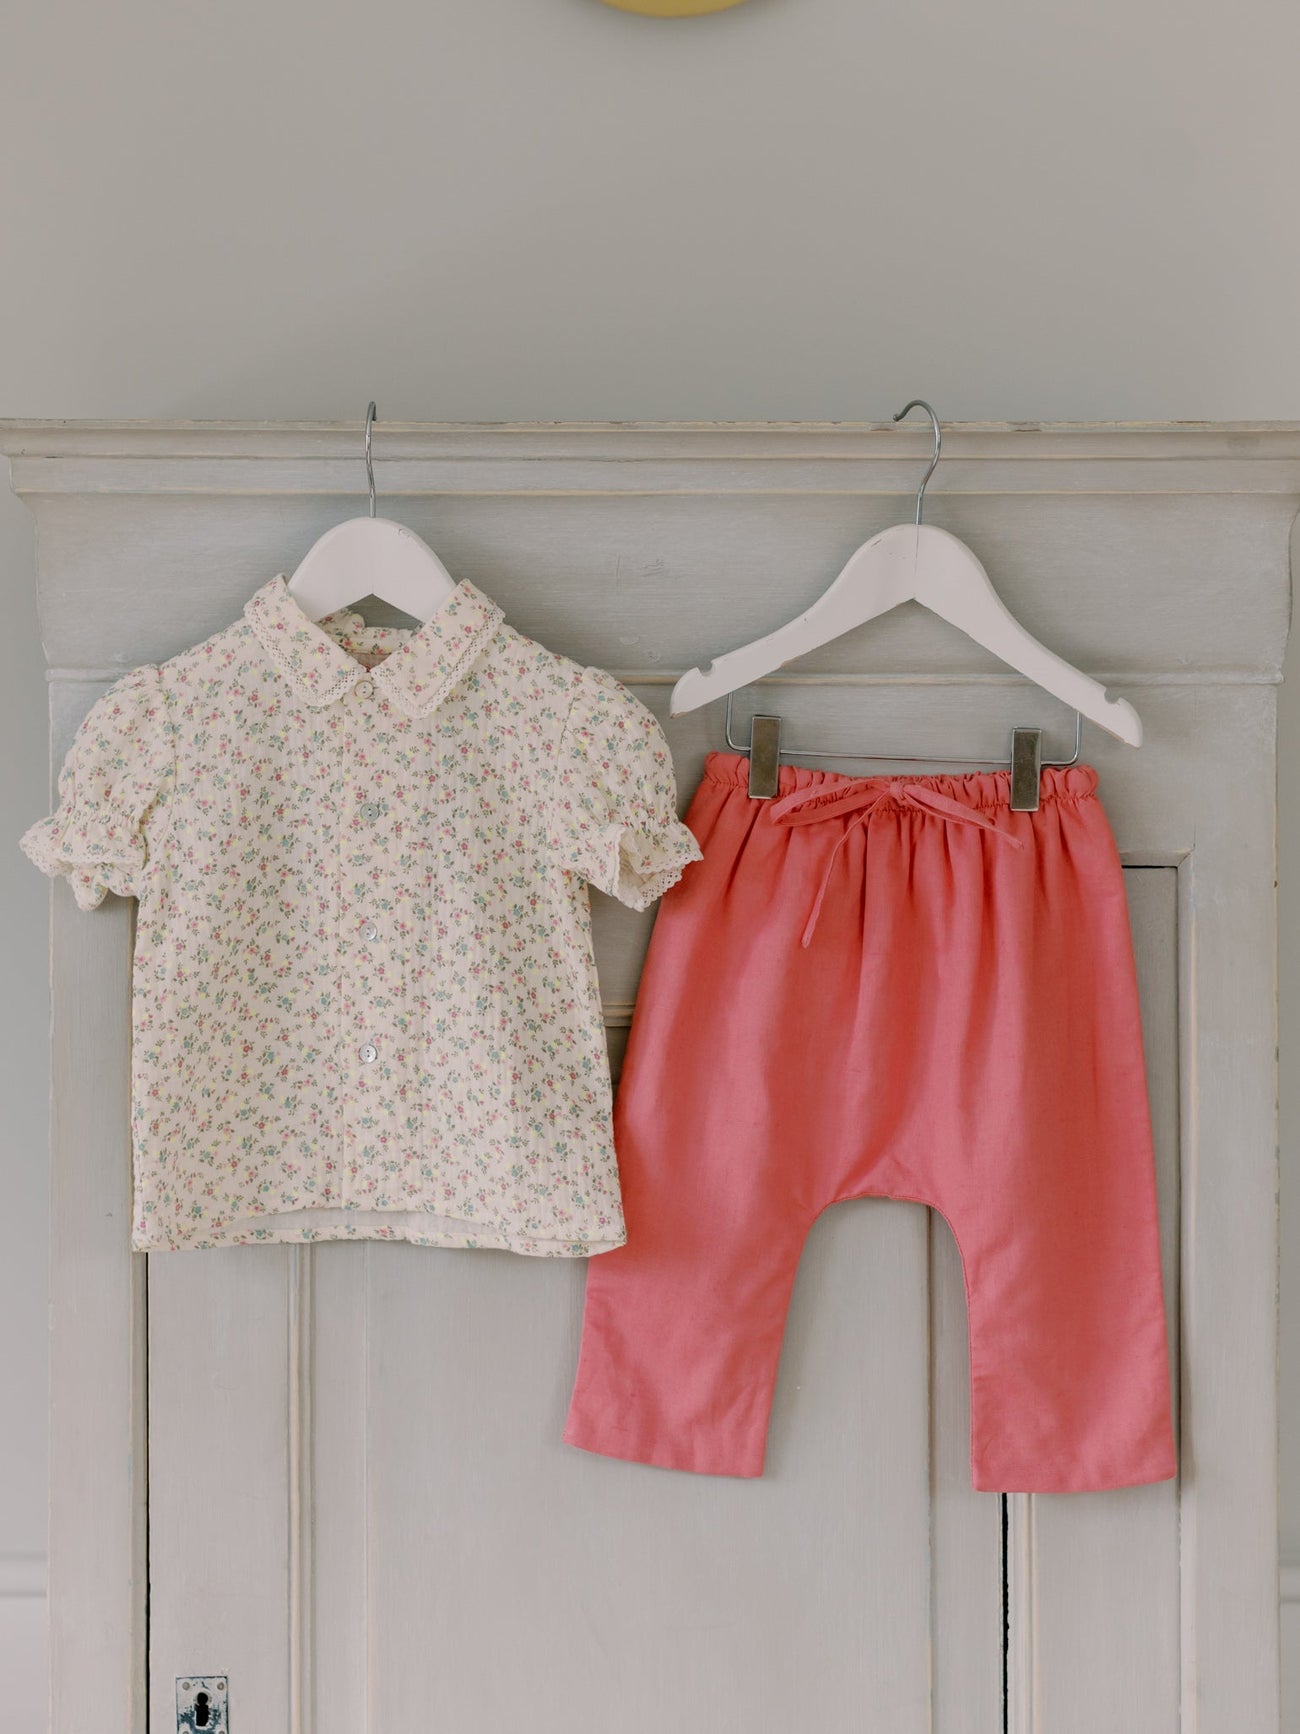 Dusty Pink Alex Baby Girl Trousers